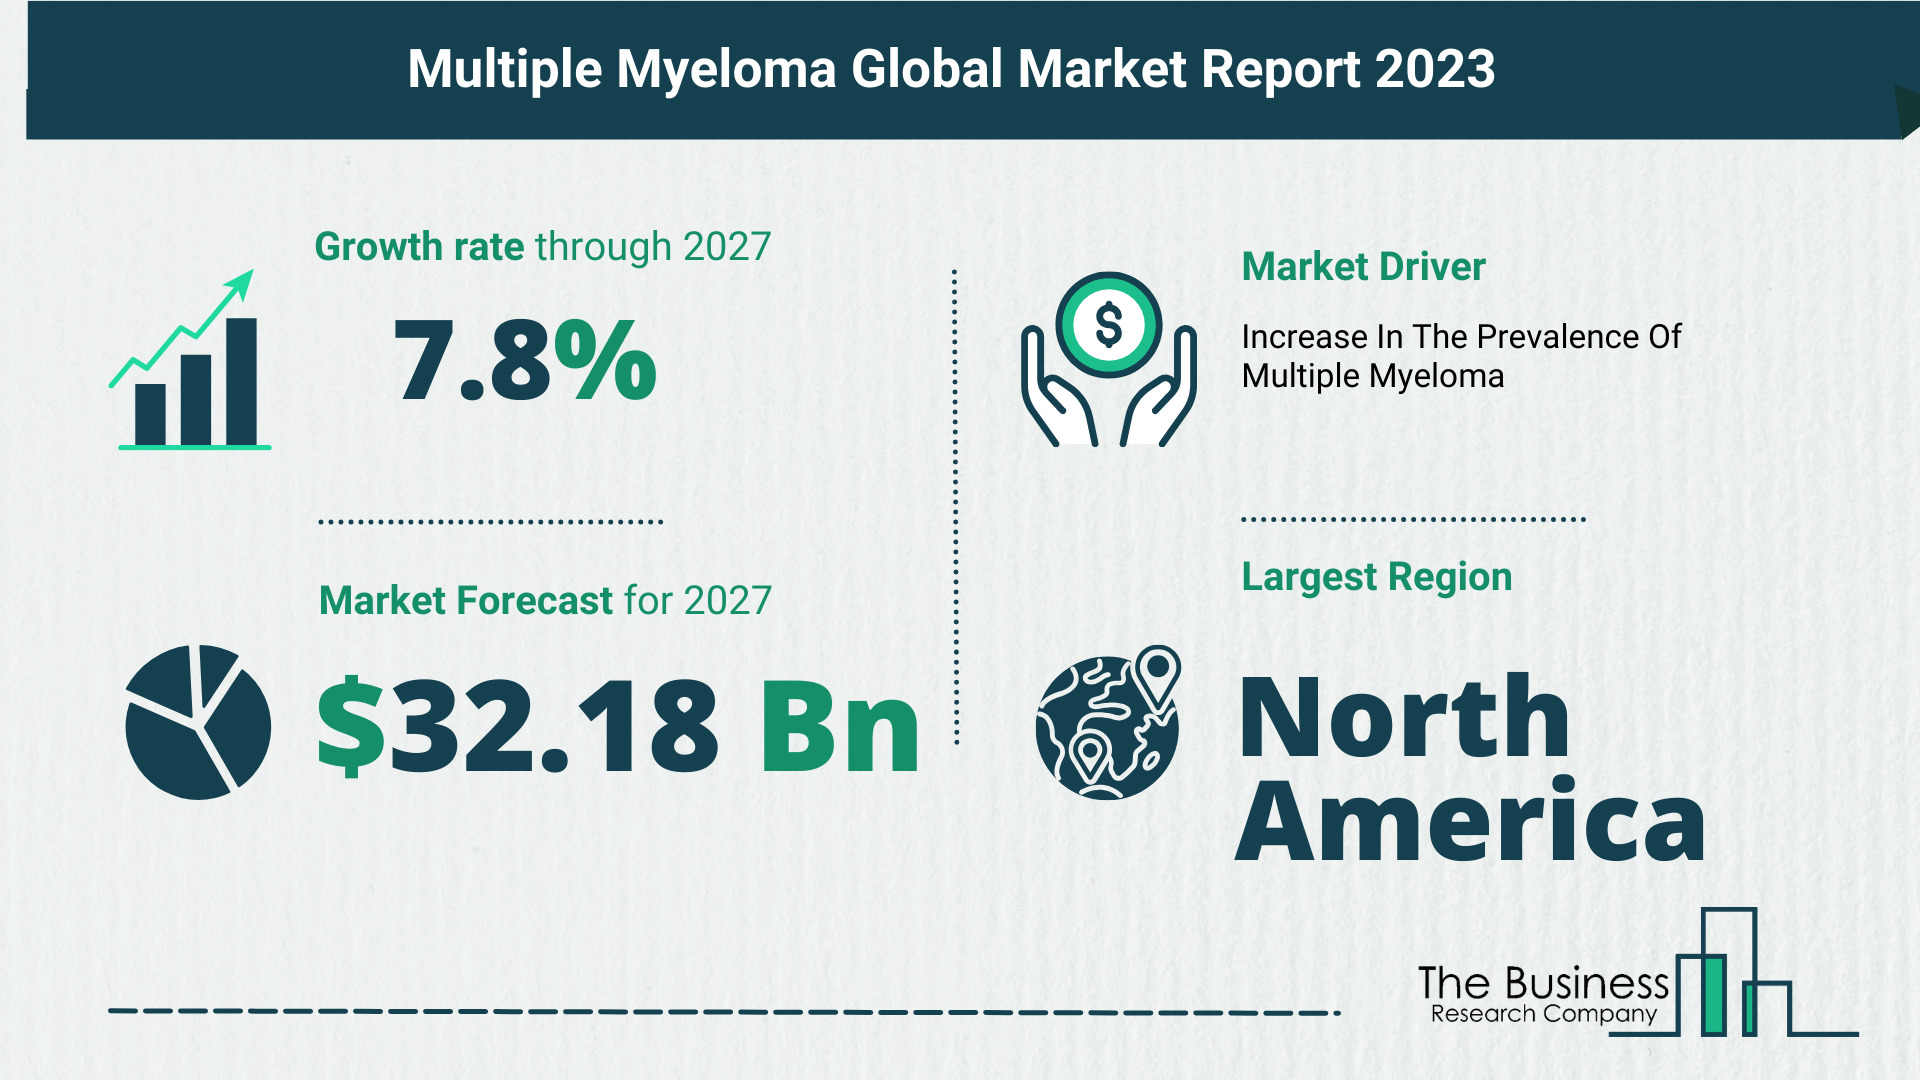 What Is The Forecast Growth Rate For The Multiple Myeloma Market?